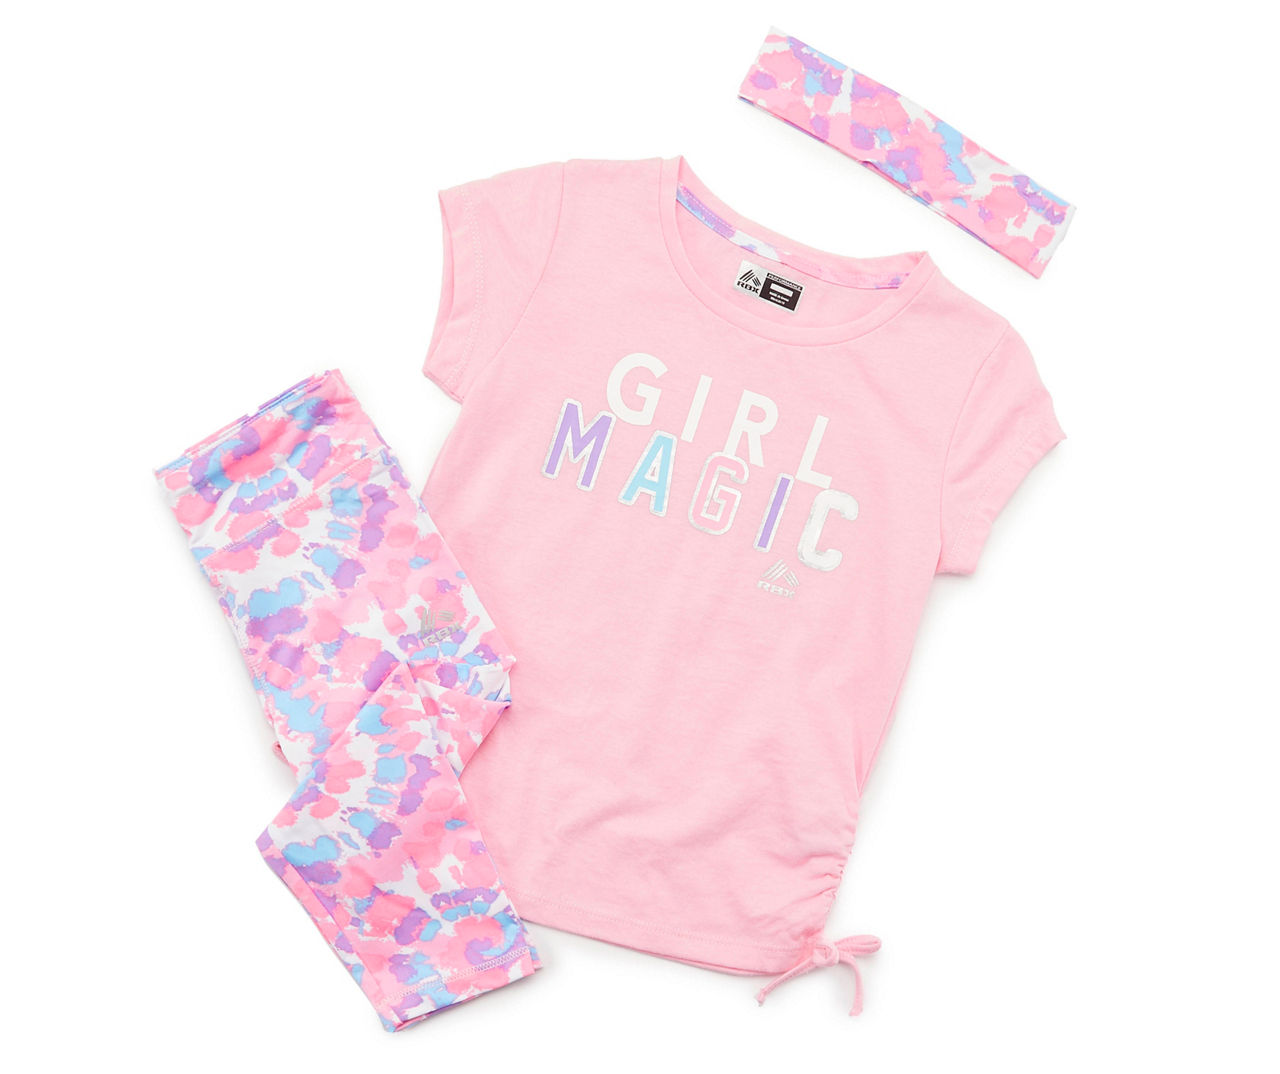 Kids' Size 4 "Girl Magic" Pink & Purple Tie-Dye 3-Piece Performance Outfit